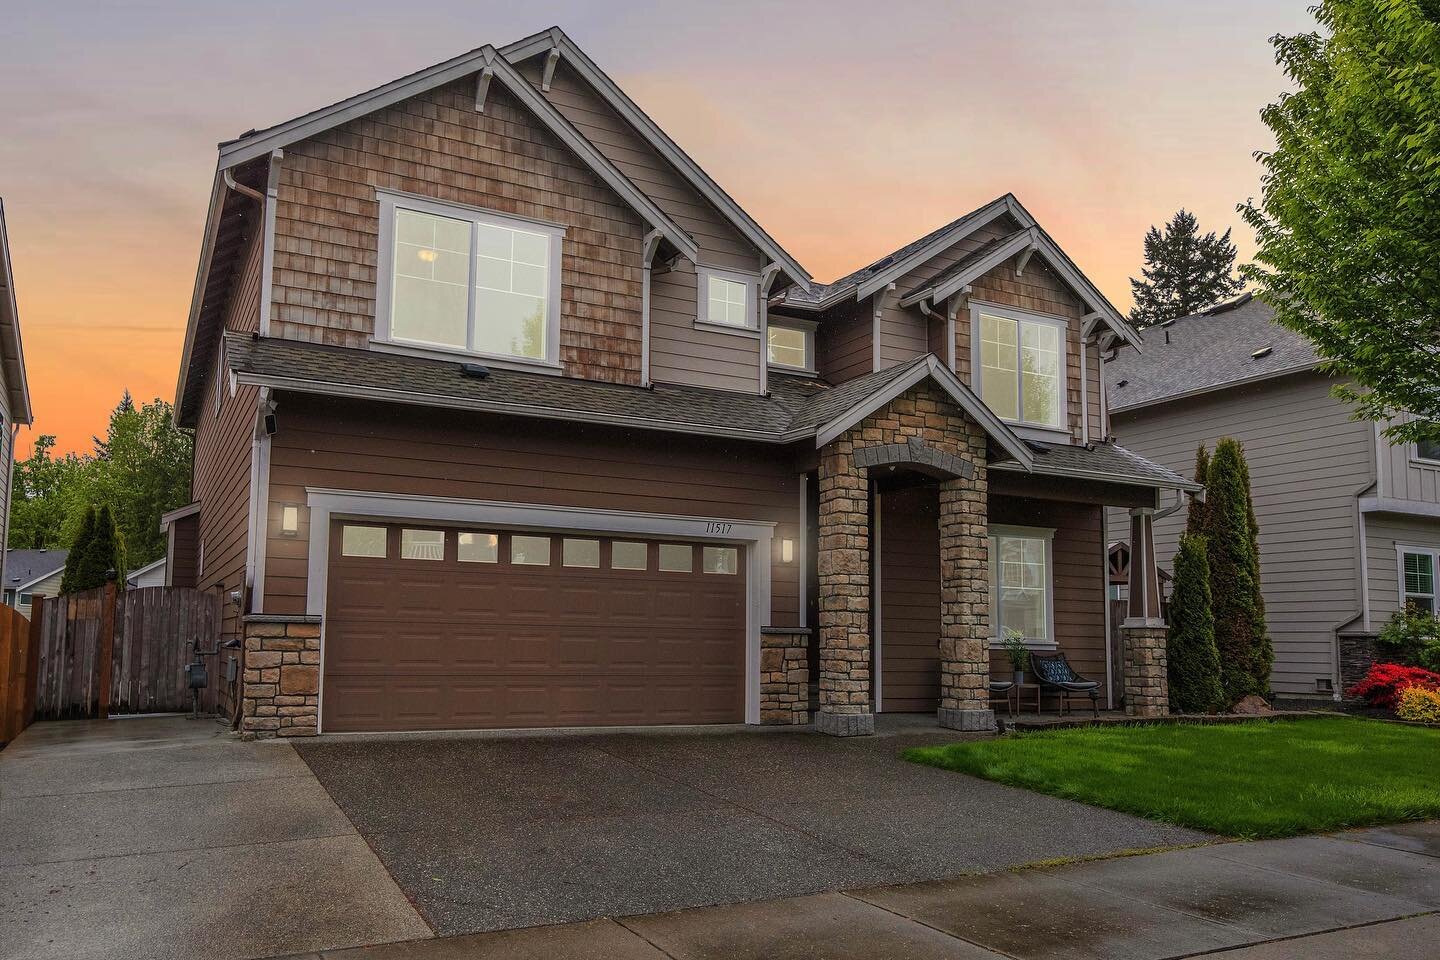 ✨Open House Saturday and Sunday from 1-4pm ✨

11517 56th Ave SE in Everett is unlike anything else on the market. 

Tucked on a quiet cul-de-sac in sought after Larimer Highlands, this smart floor plan features four generous bedrooms, including a pri